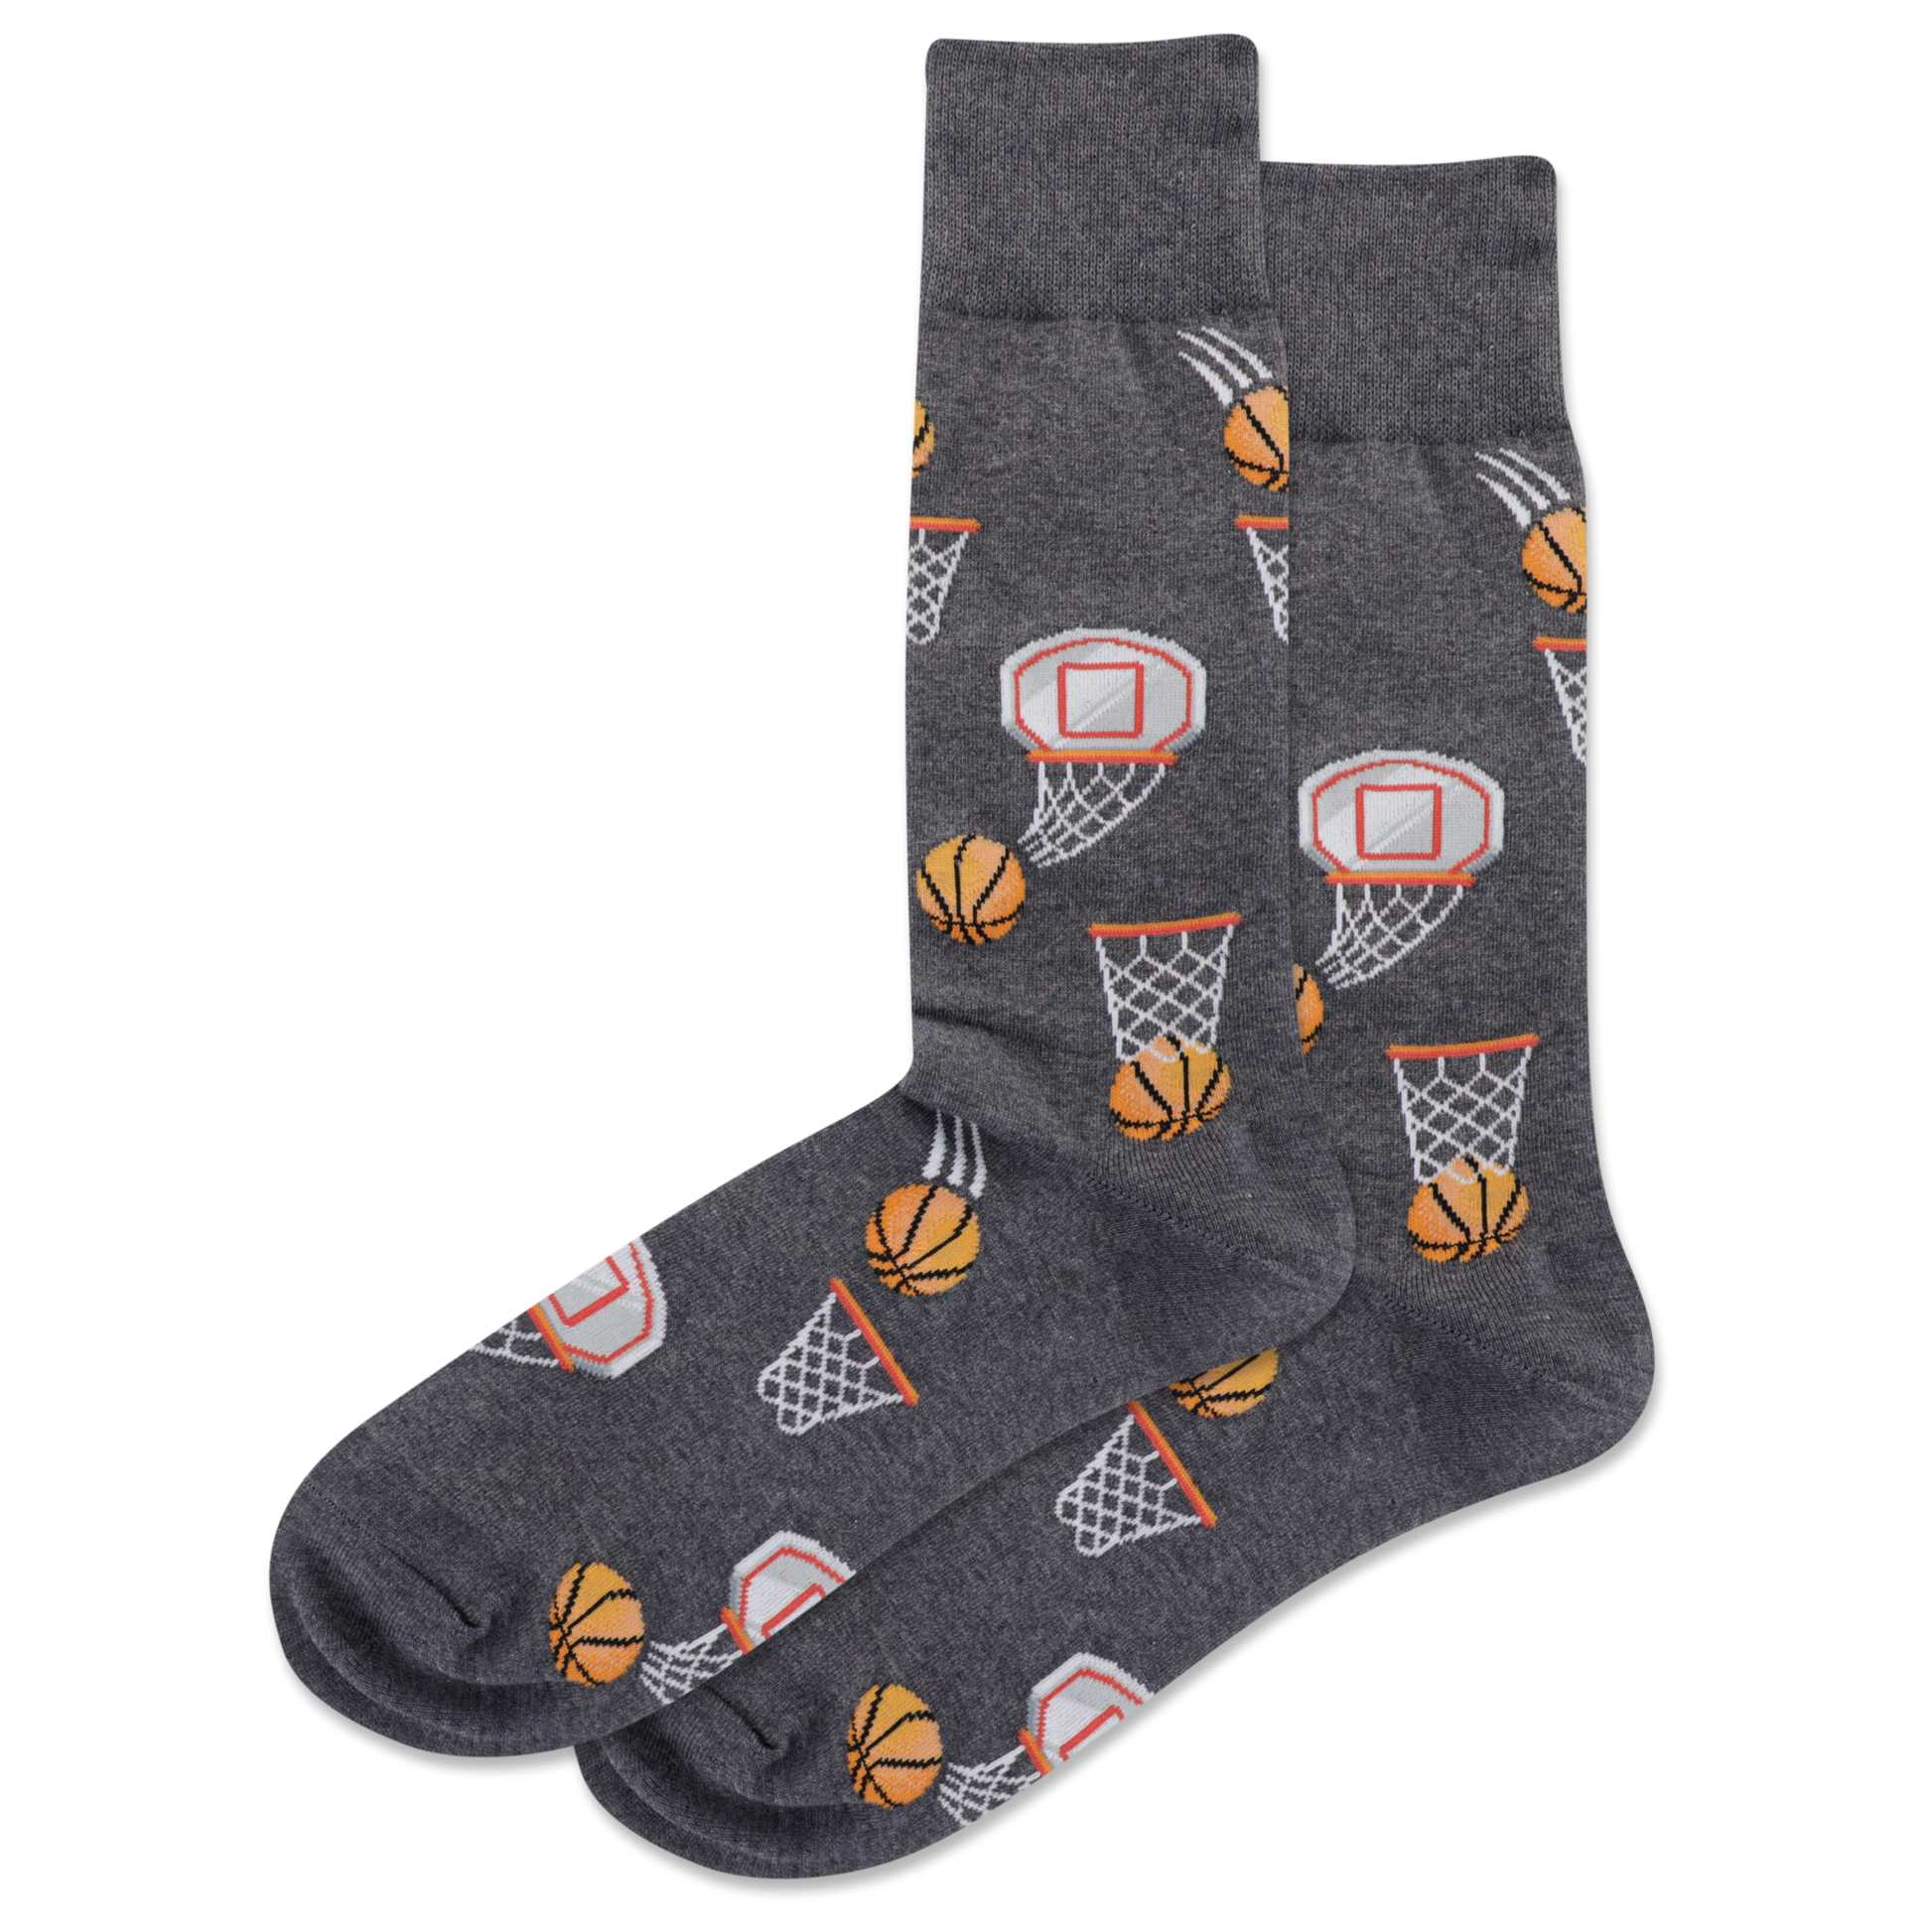 men's basketball socks are charcoal with basketballs and hoops all over and displayed against a white background